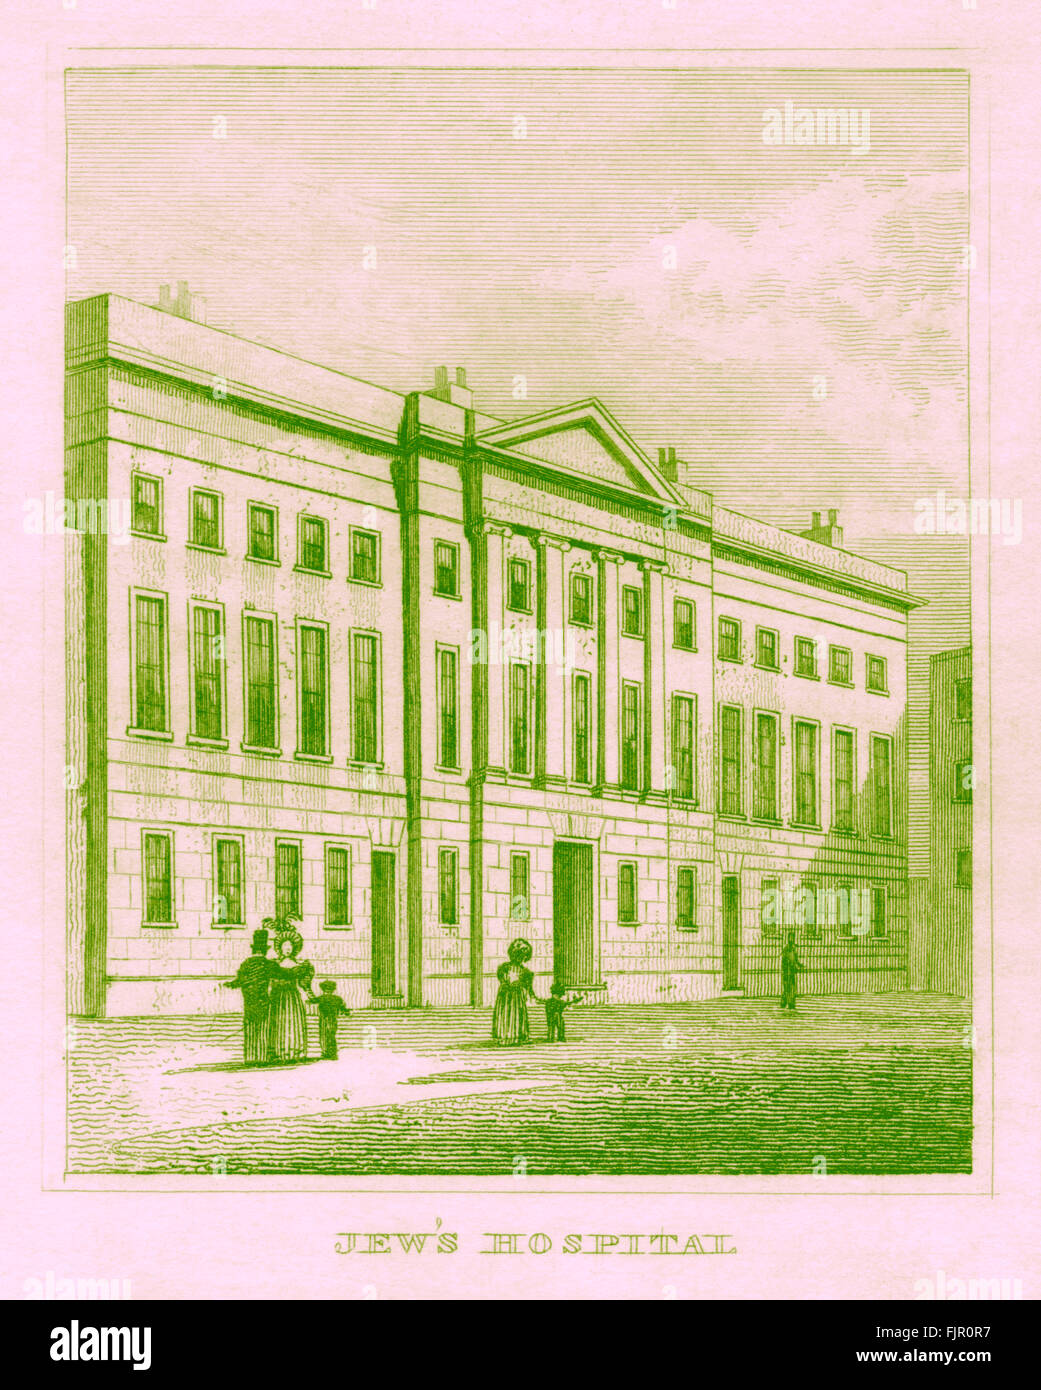 Jews' Hospital, Mile End, London. Founded in 1795. From 1835 print. Stock Photo